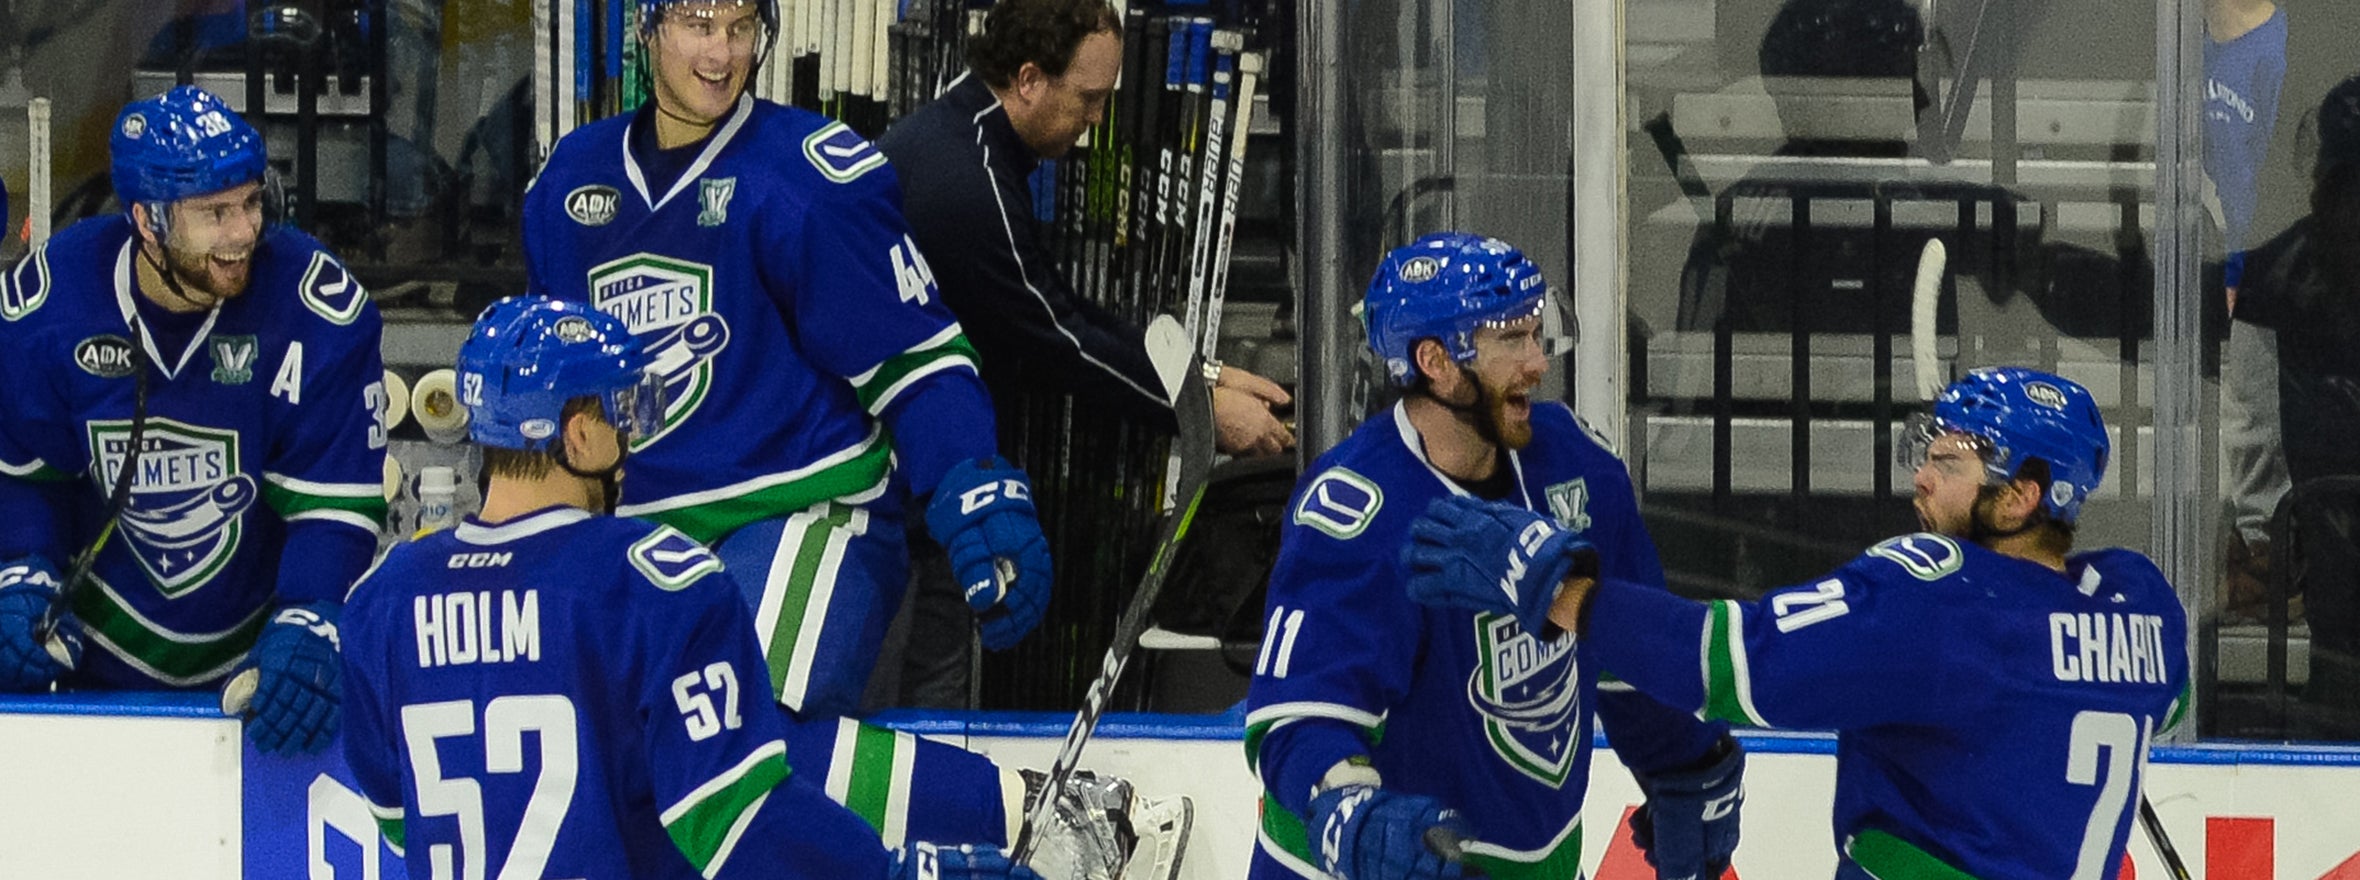 CHAPUT GROUNDS ROCKET IN COMETS OVERTIME WIN